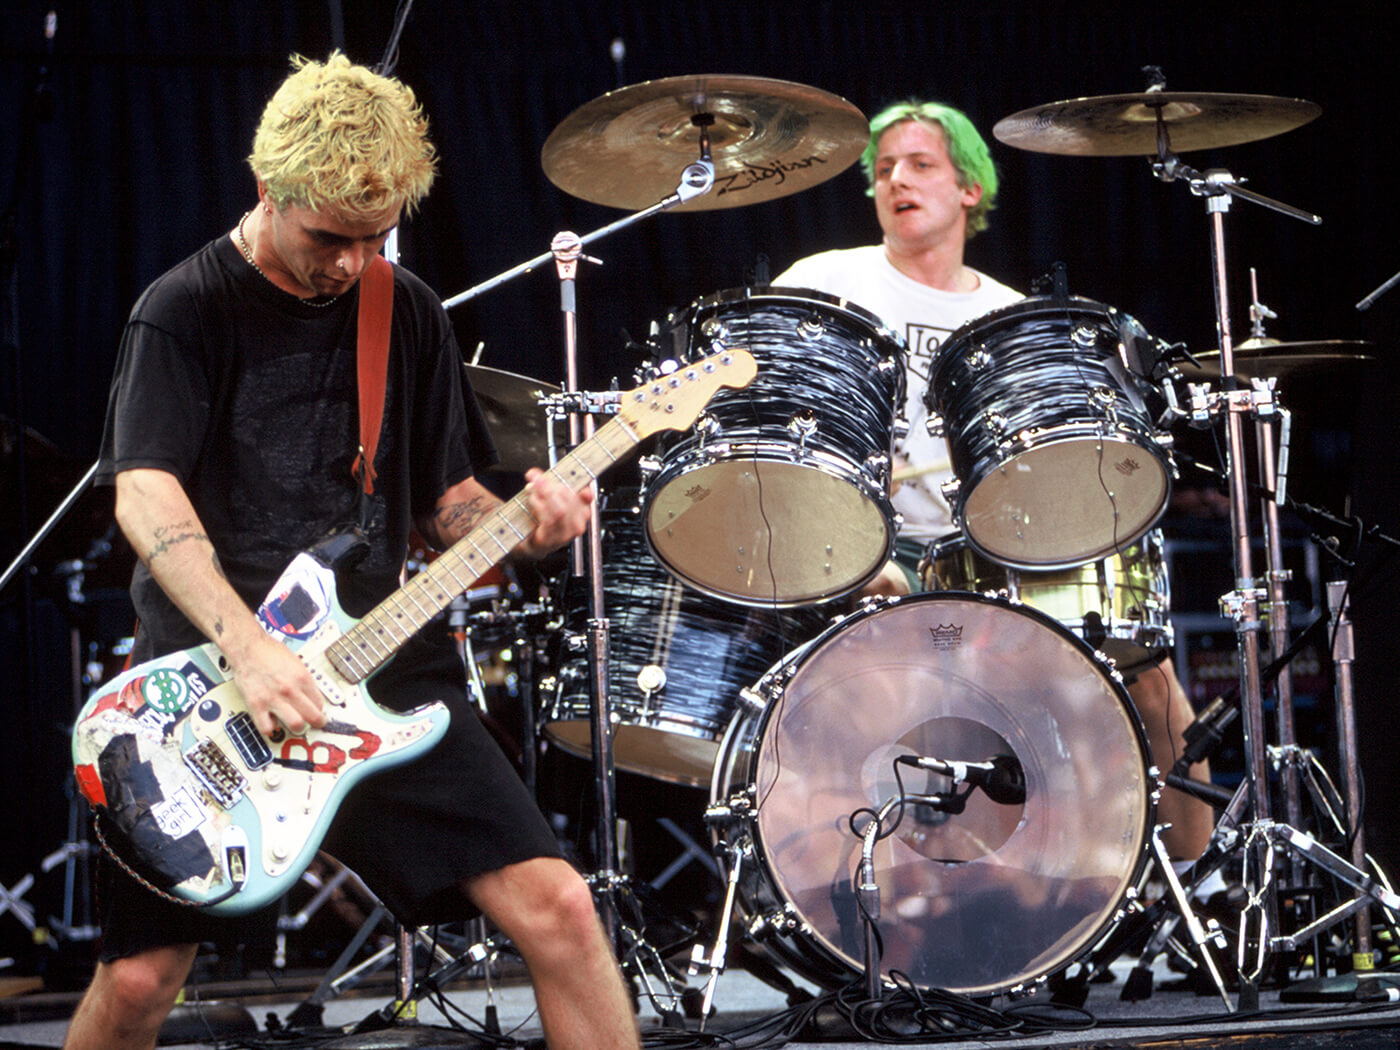 Billie Joe Armstrong and Al Sobrante of Green Day performing at Live 105's BFD in 1994 by Tim Mosenfelder/Getty Images